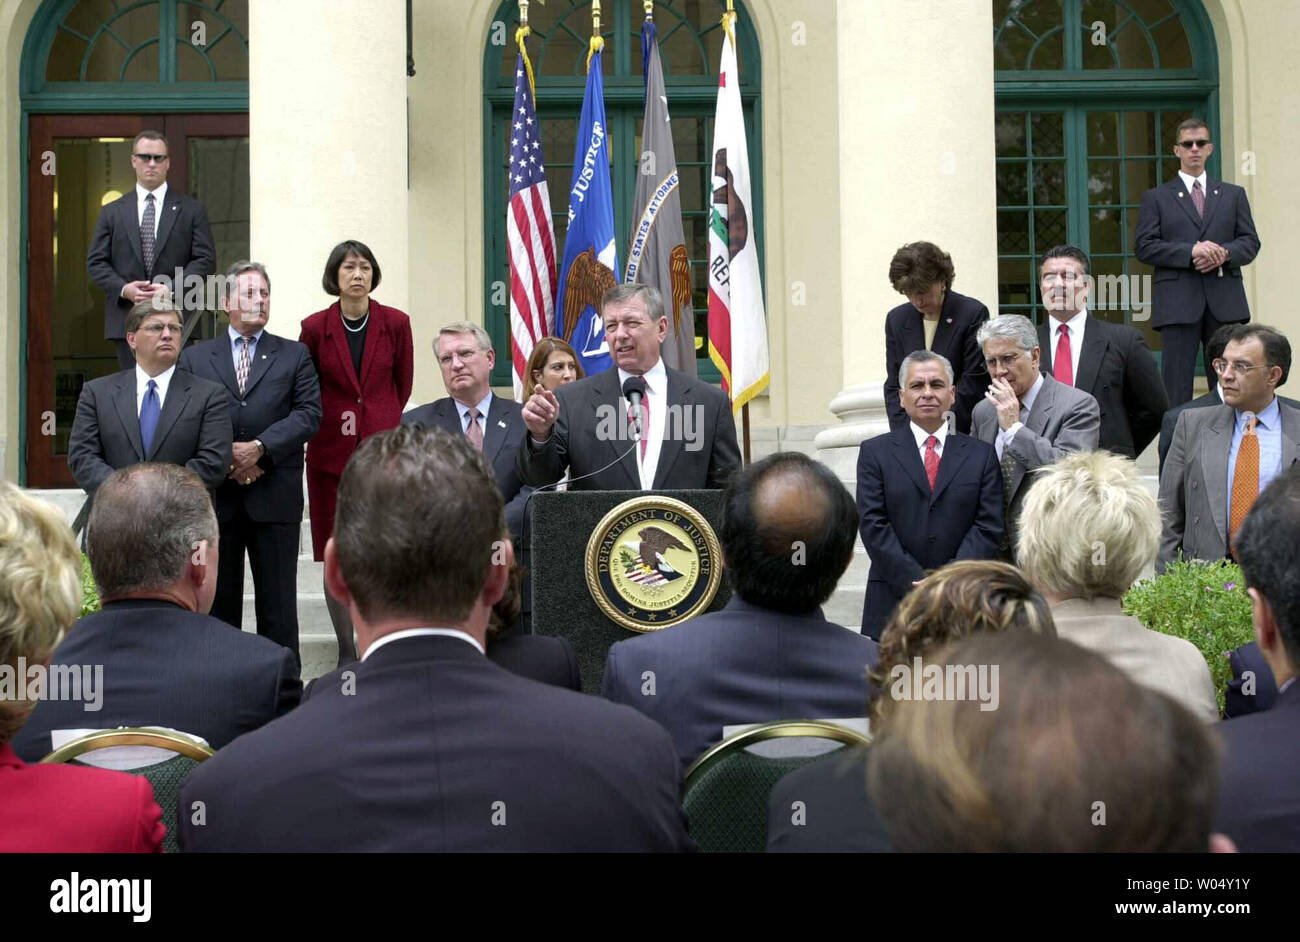 SDP2003070806- SAN DIEGO, July 8 (UPI) - US Attorney General John Ashcroft along with Rafael Macedo De la Concha, (right) the Attorney General of Mexico announced July 8 2003 at a news conference in San Diego, California, the indictment of 12 individuals who represent the hierarchy of the Arellano-Felix drug cartel. The Arellano-Felix organization is the most notorious multi-national drug trafficking organization ever and is responsible for multiple murders and the transportation of cocaine and marijuana from Tijuana, Mexico to the US through the San Diego and Mexicali borders.     ec / EARL S Stock Photo